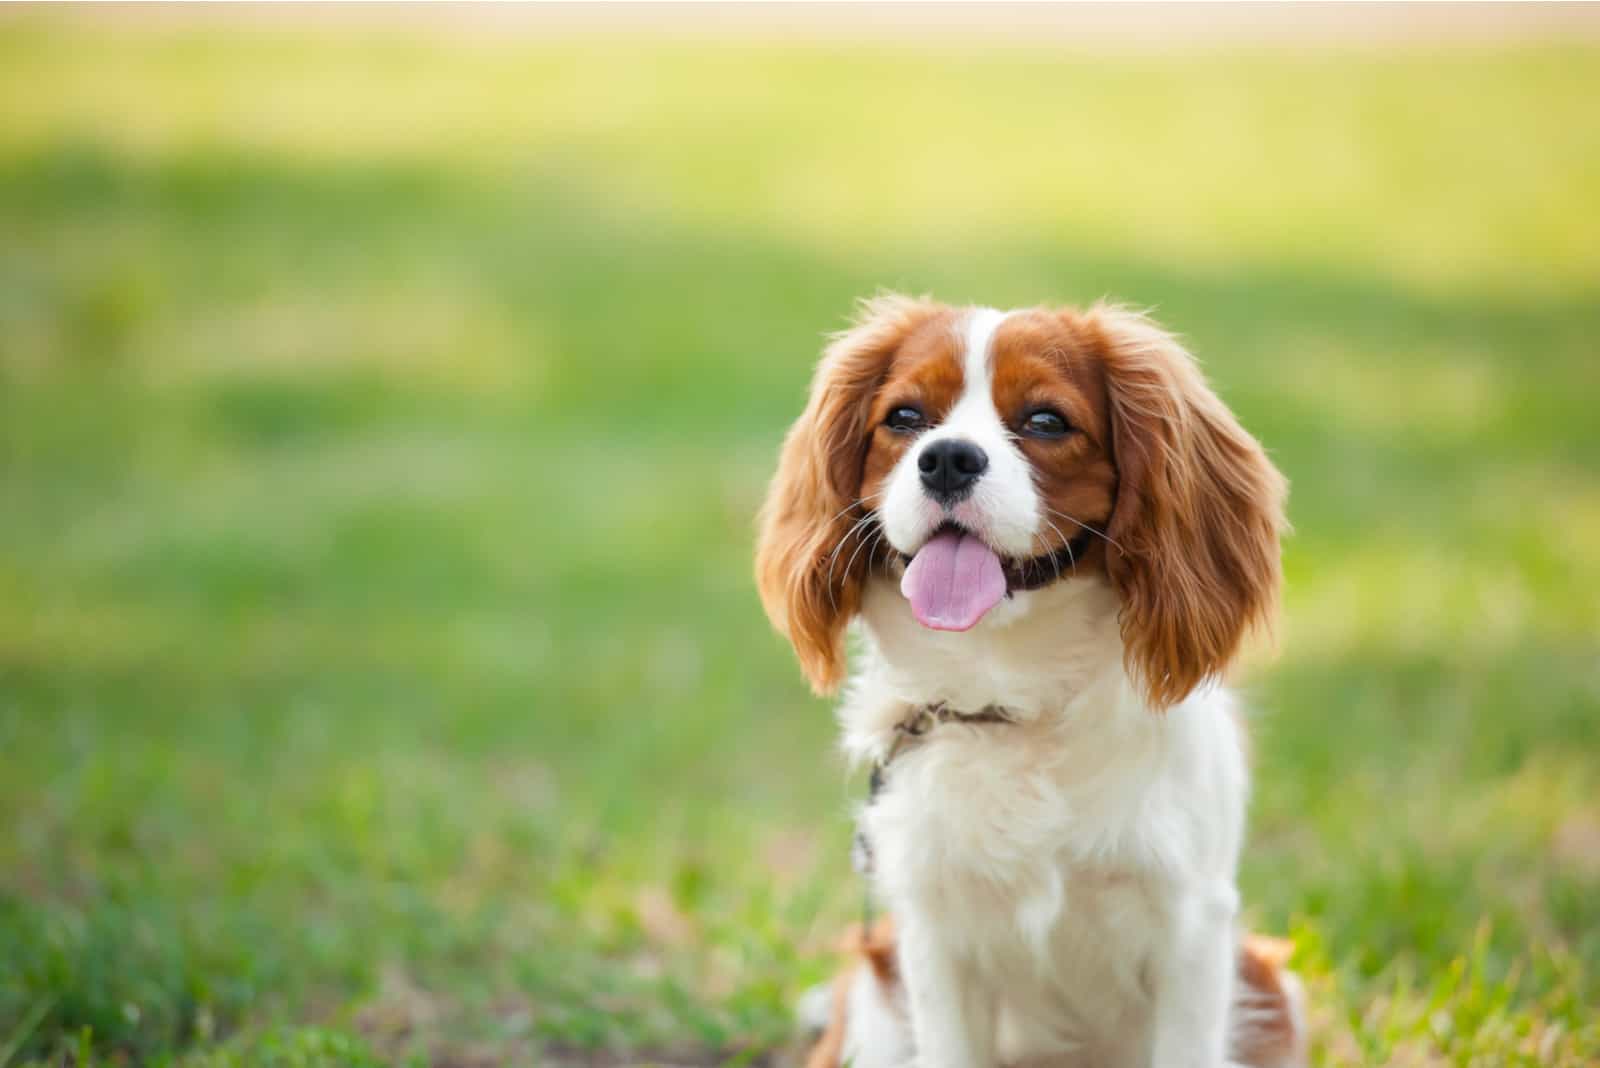 cavalier king charles on a grass